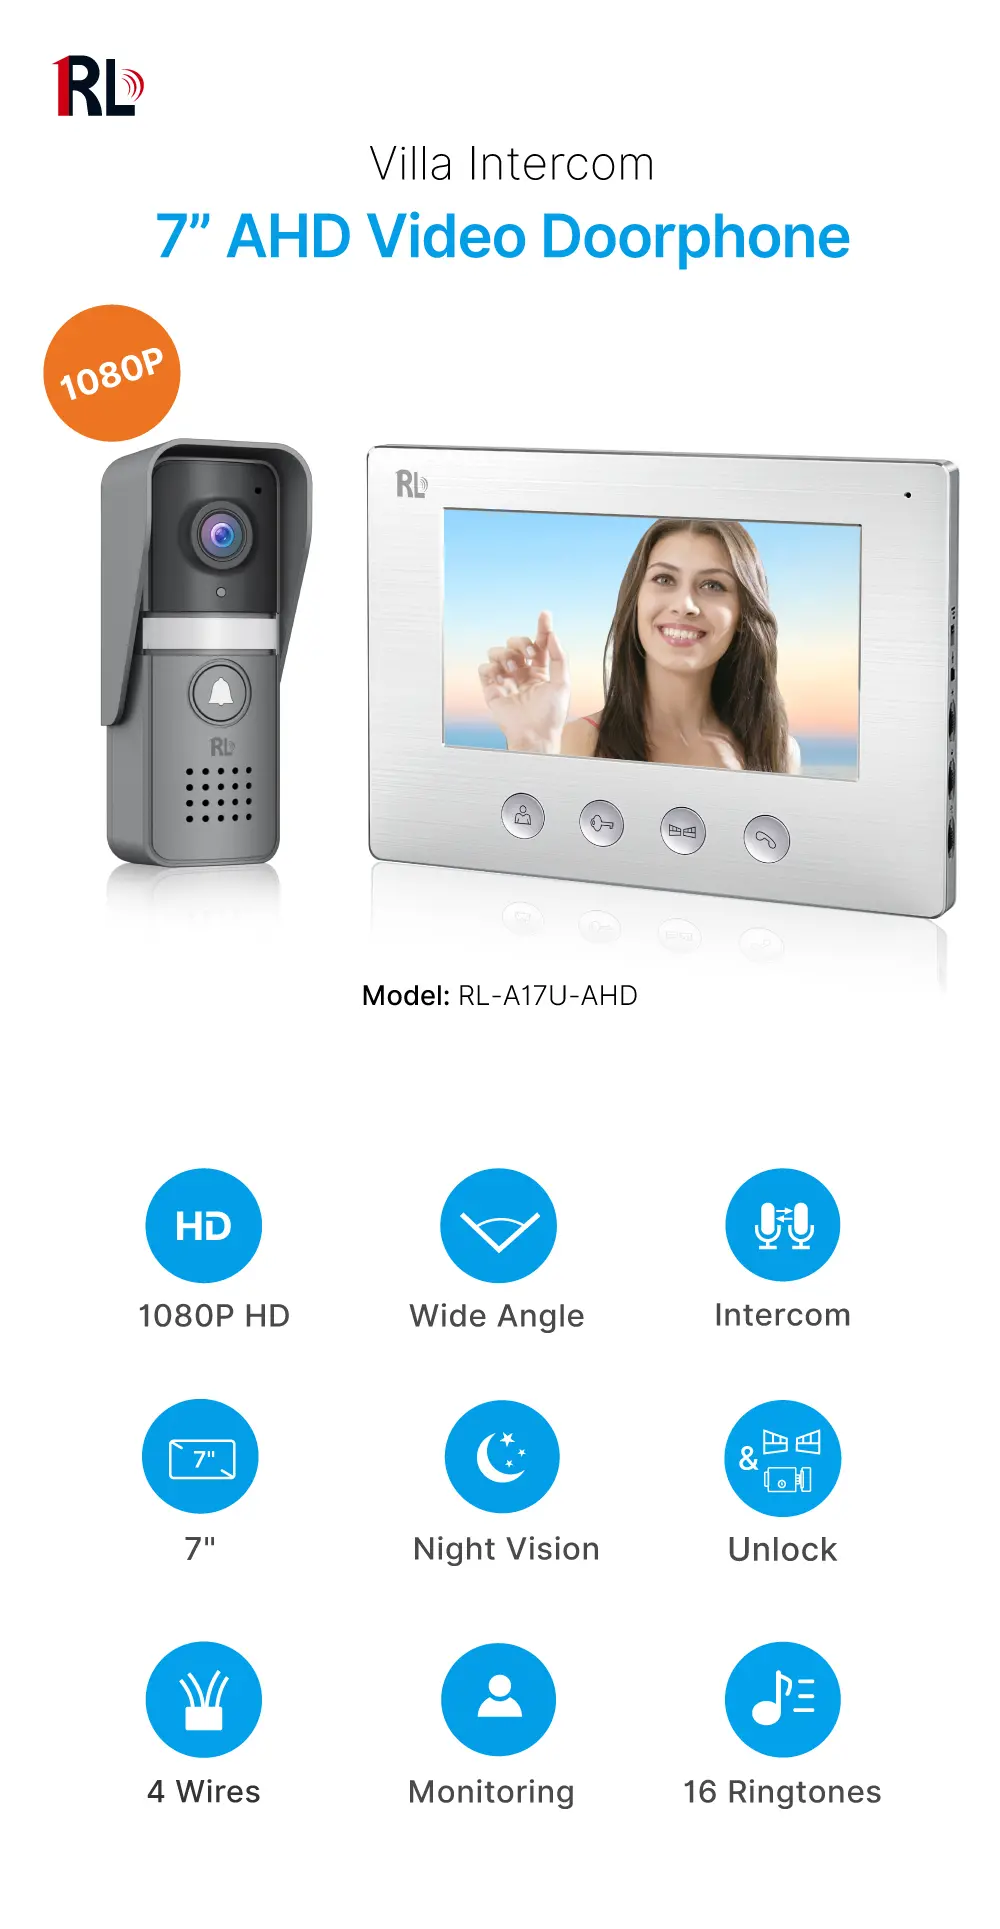  7 inch AHD Video Doorphone #RL-A17U-AHD - Water-proof, oxidation-proof, - Camera light compensation at night. - Release the electric lock and gate lock. - Monitor the outside. _01